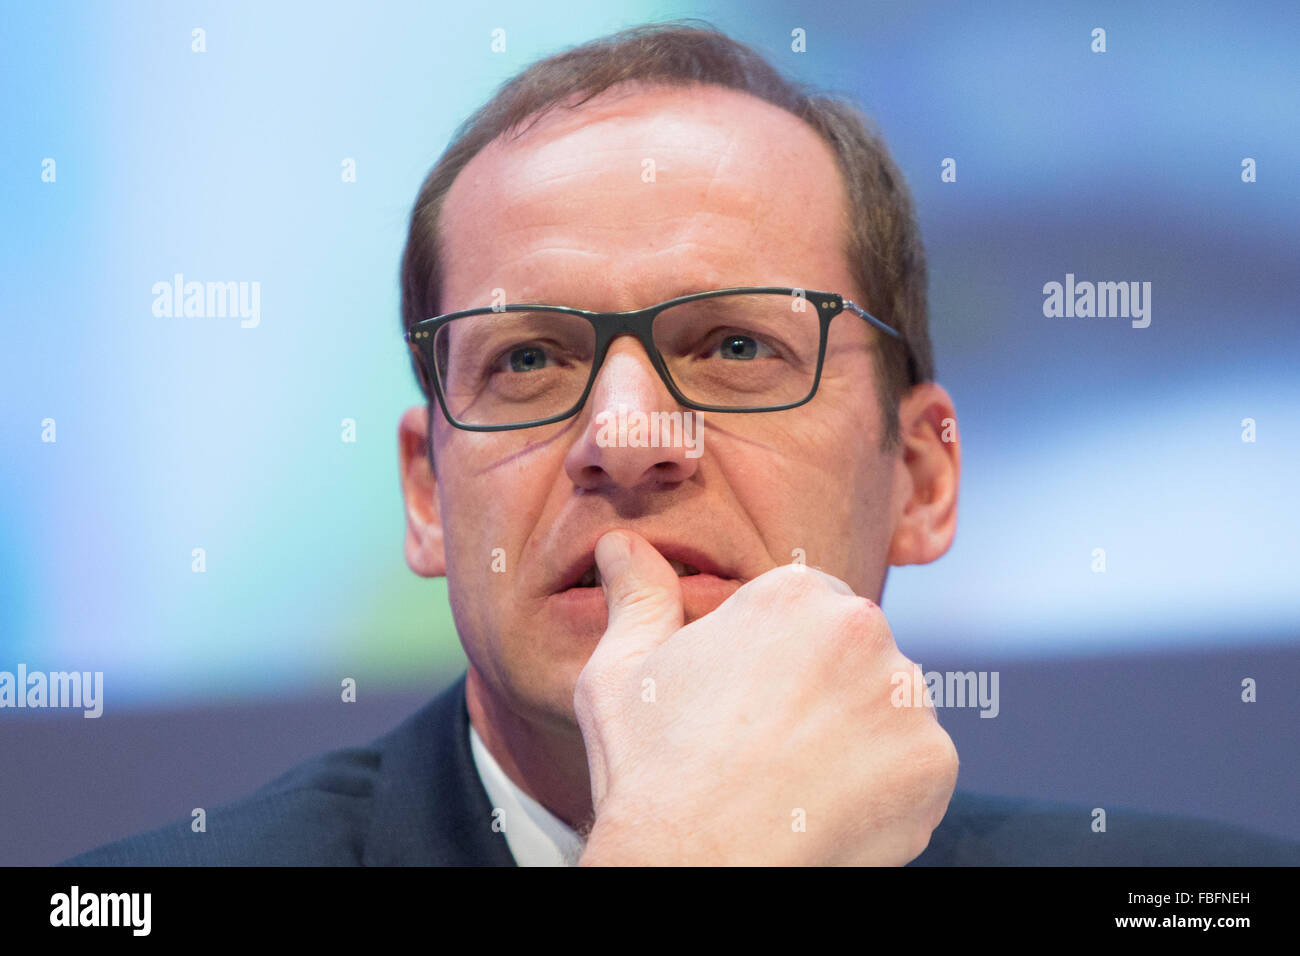 Duesseldorf, Germany. 14th Jan, 2016. Tour director Christian Prudhomme pictured during a press conference on the start of the Tour de France 2017 in Duesseldorf, Germany, 14 January 2016. PHOTO: MAJA HITIJ/DPA/Alamy Live News Stock Photo